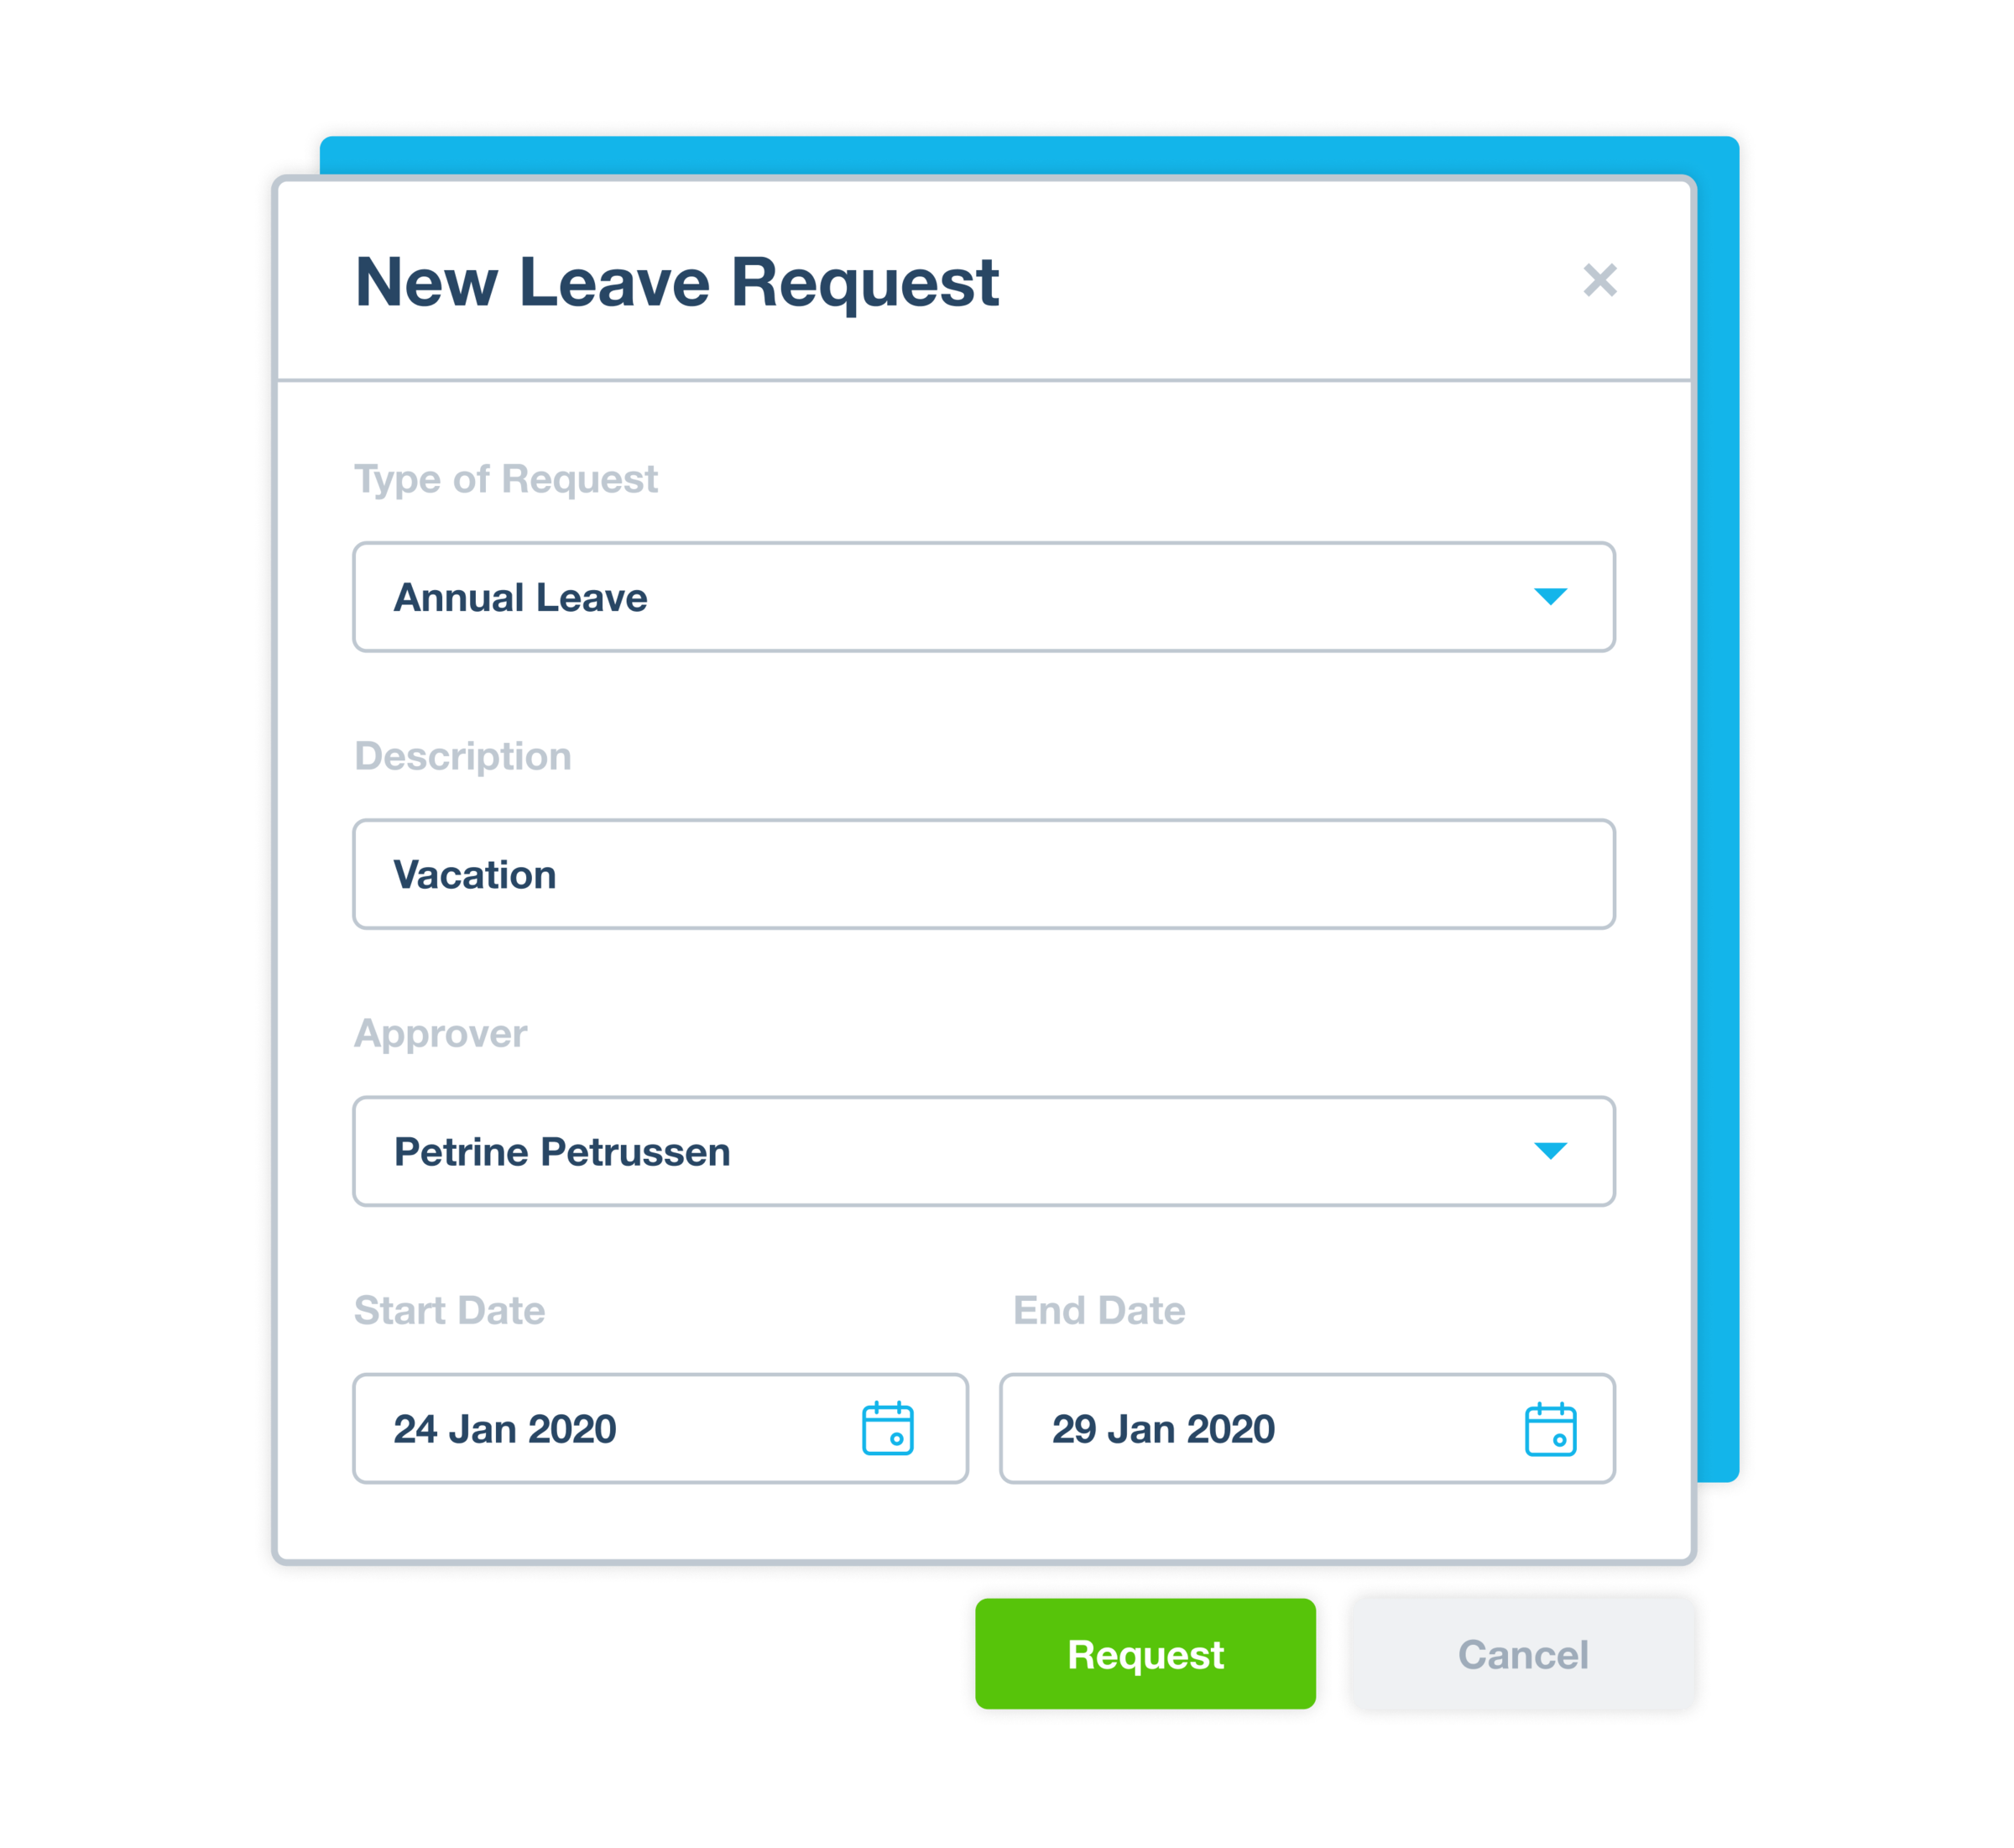 Snippet of Xero UI demonstrating a New Leave Request